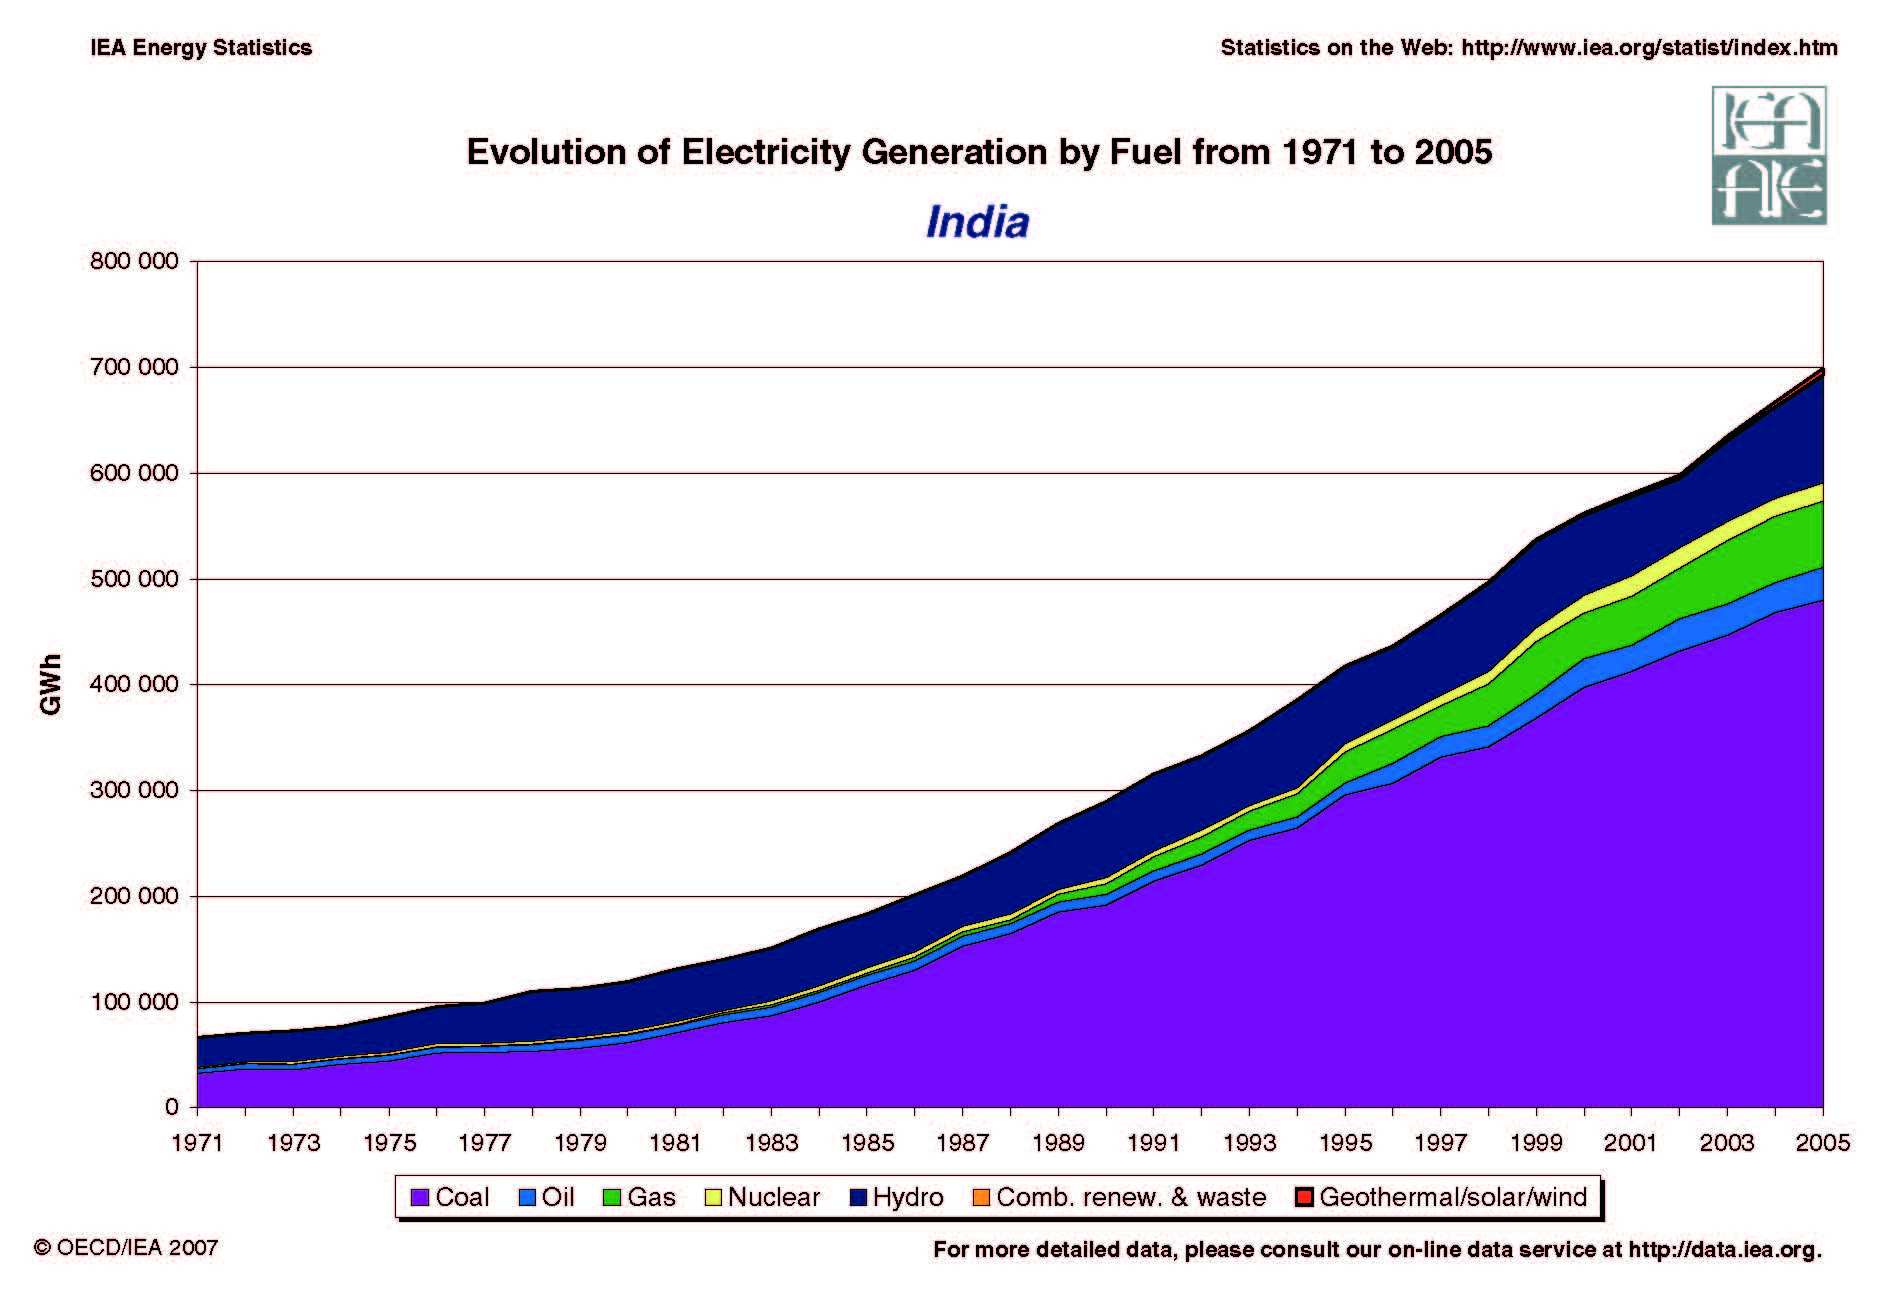 india electricity generation by fuel, energy issues, energy potential